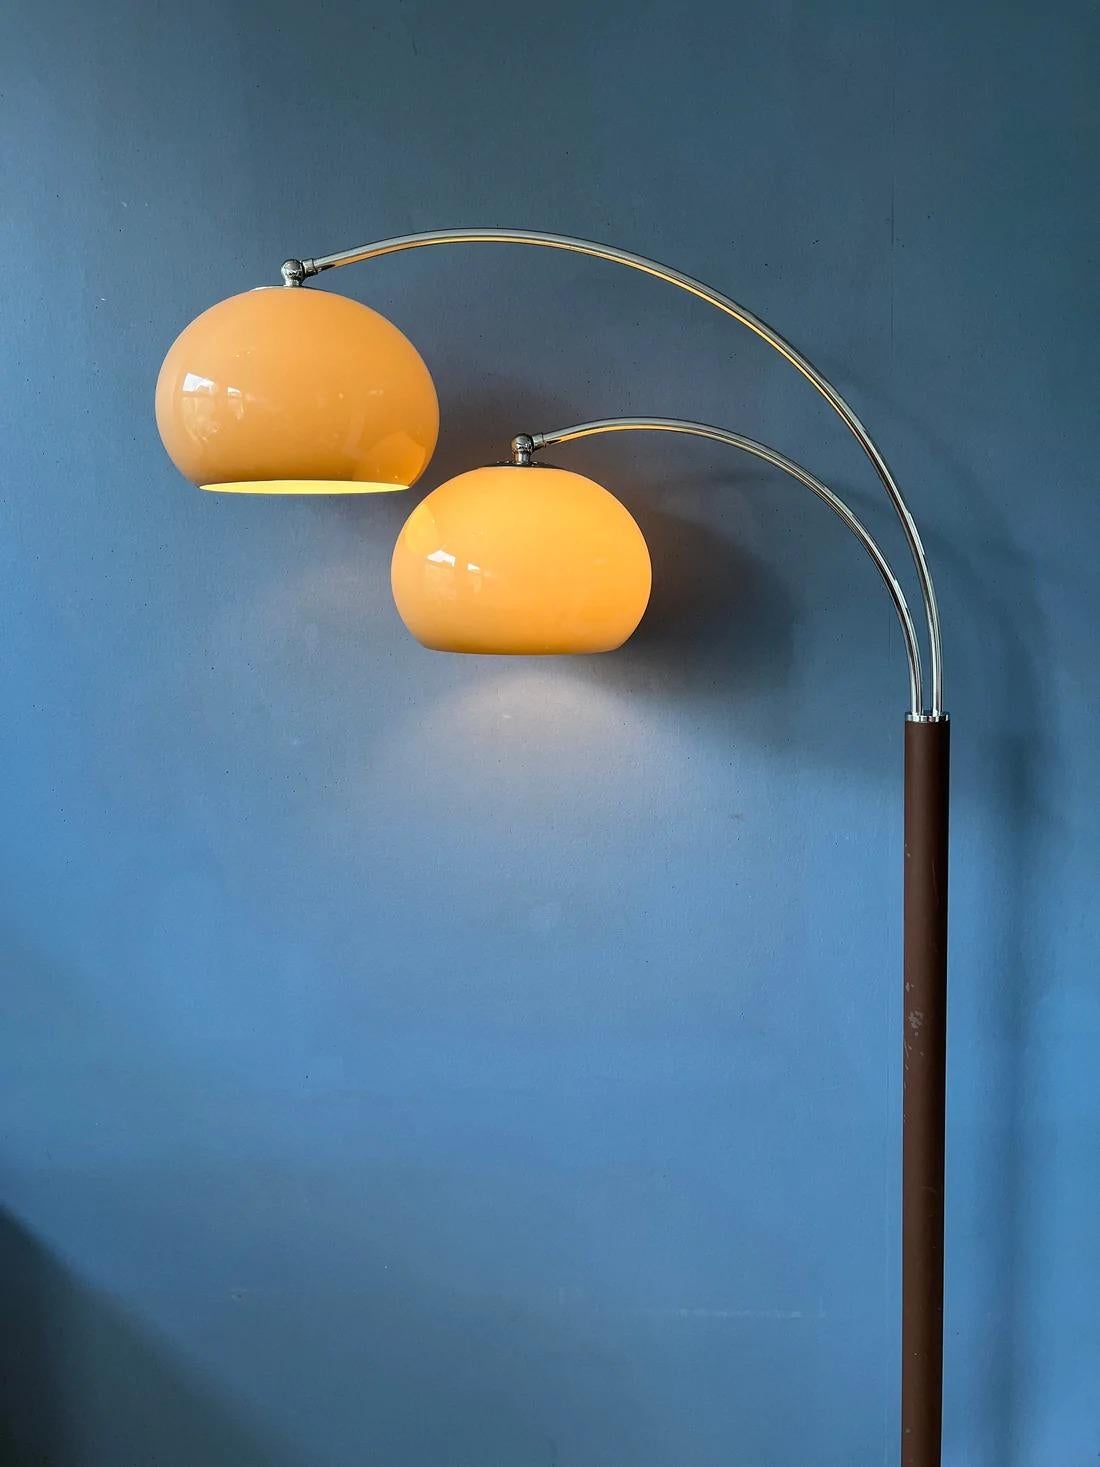 Iconic Dijkstra double arc floor lamp with acrylic glass mushroom shades in beige colour and a brown/chrome base. The shades produce a warm light and can be turned downwards or upwards. The arcs are flexible and can be aligned or positioned in